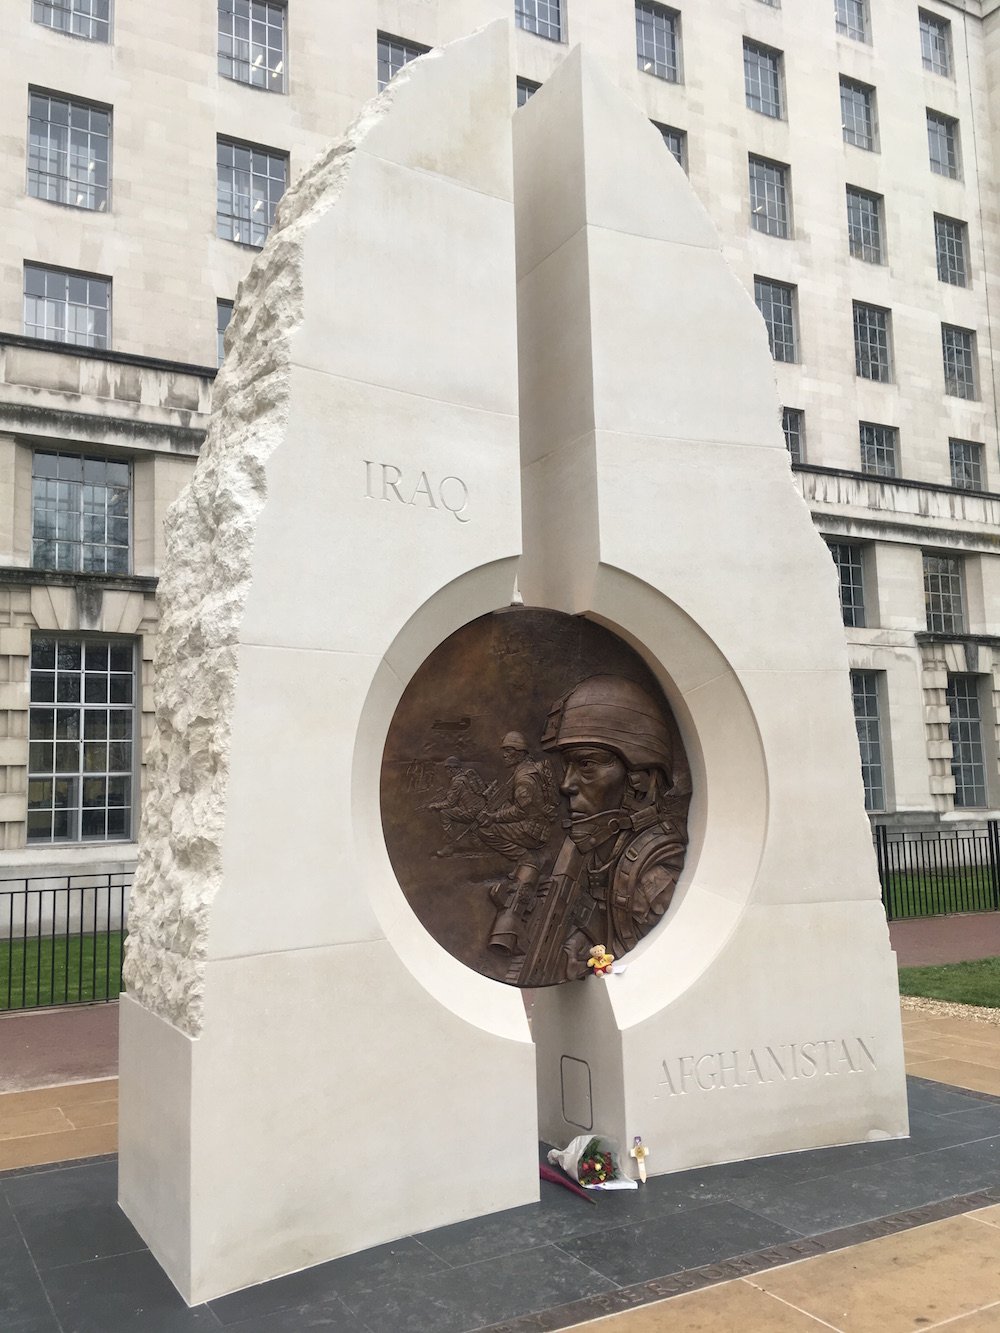 Paul Day’s memorial to the British invasions of Afghanistan and Iraq. Image: No Swan So Fine under a CC licence